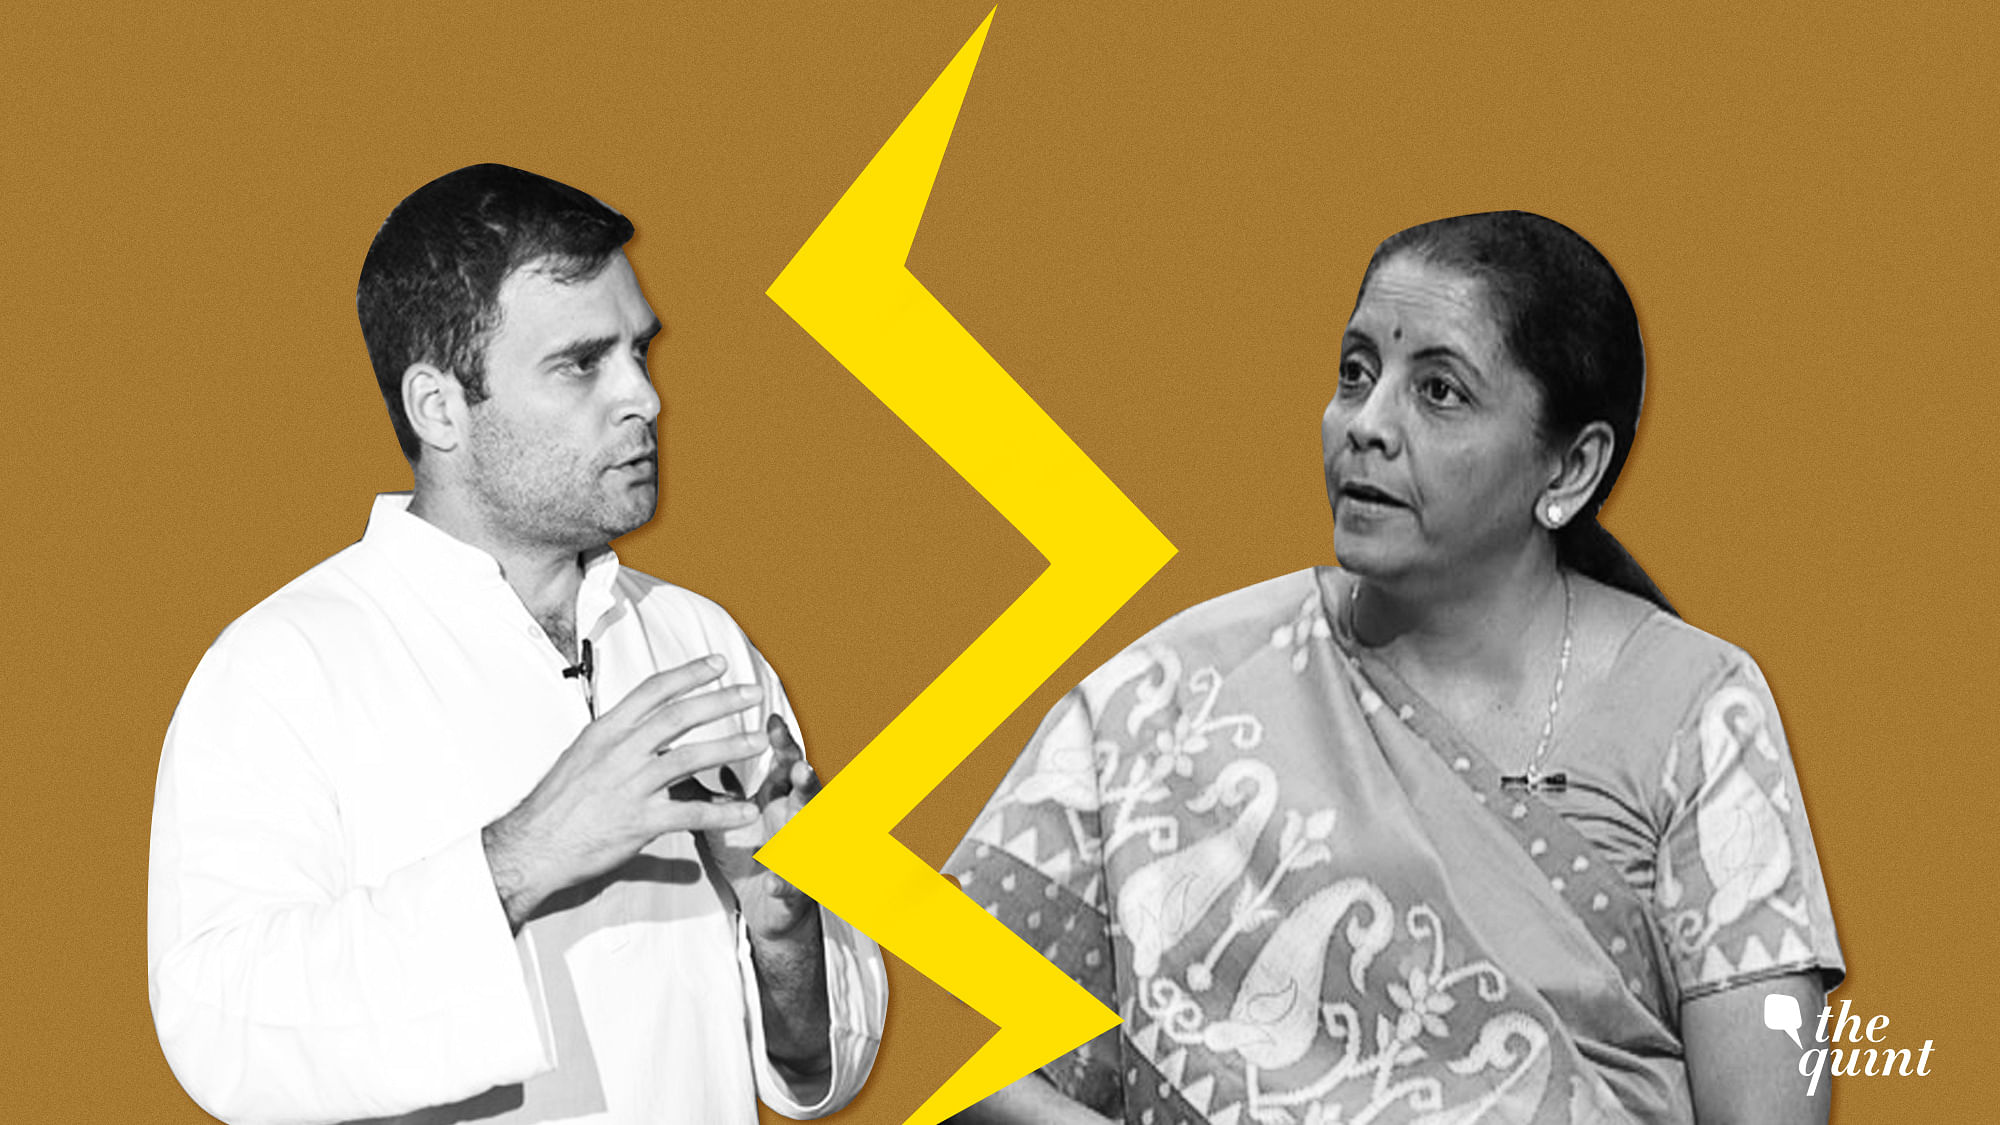 Nirmala Sitharaman and Rahul Gandhi locked horns on Friday over latest allegations of the PMO’s role in the Rafale deal.